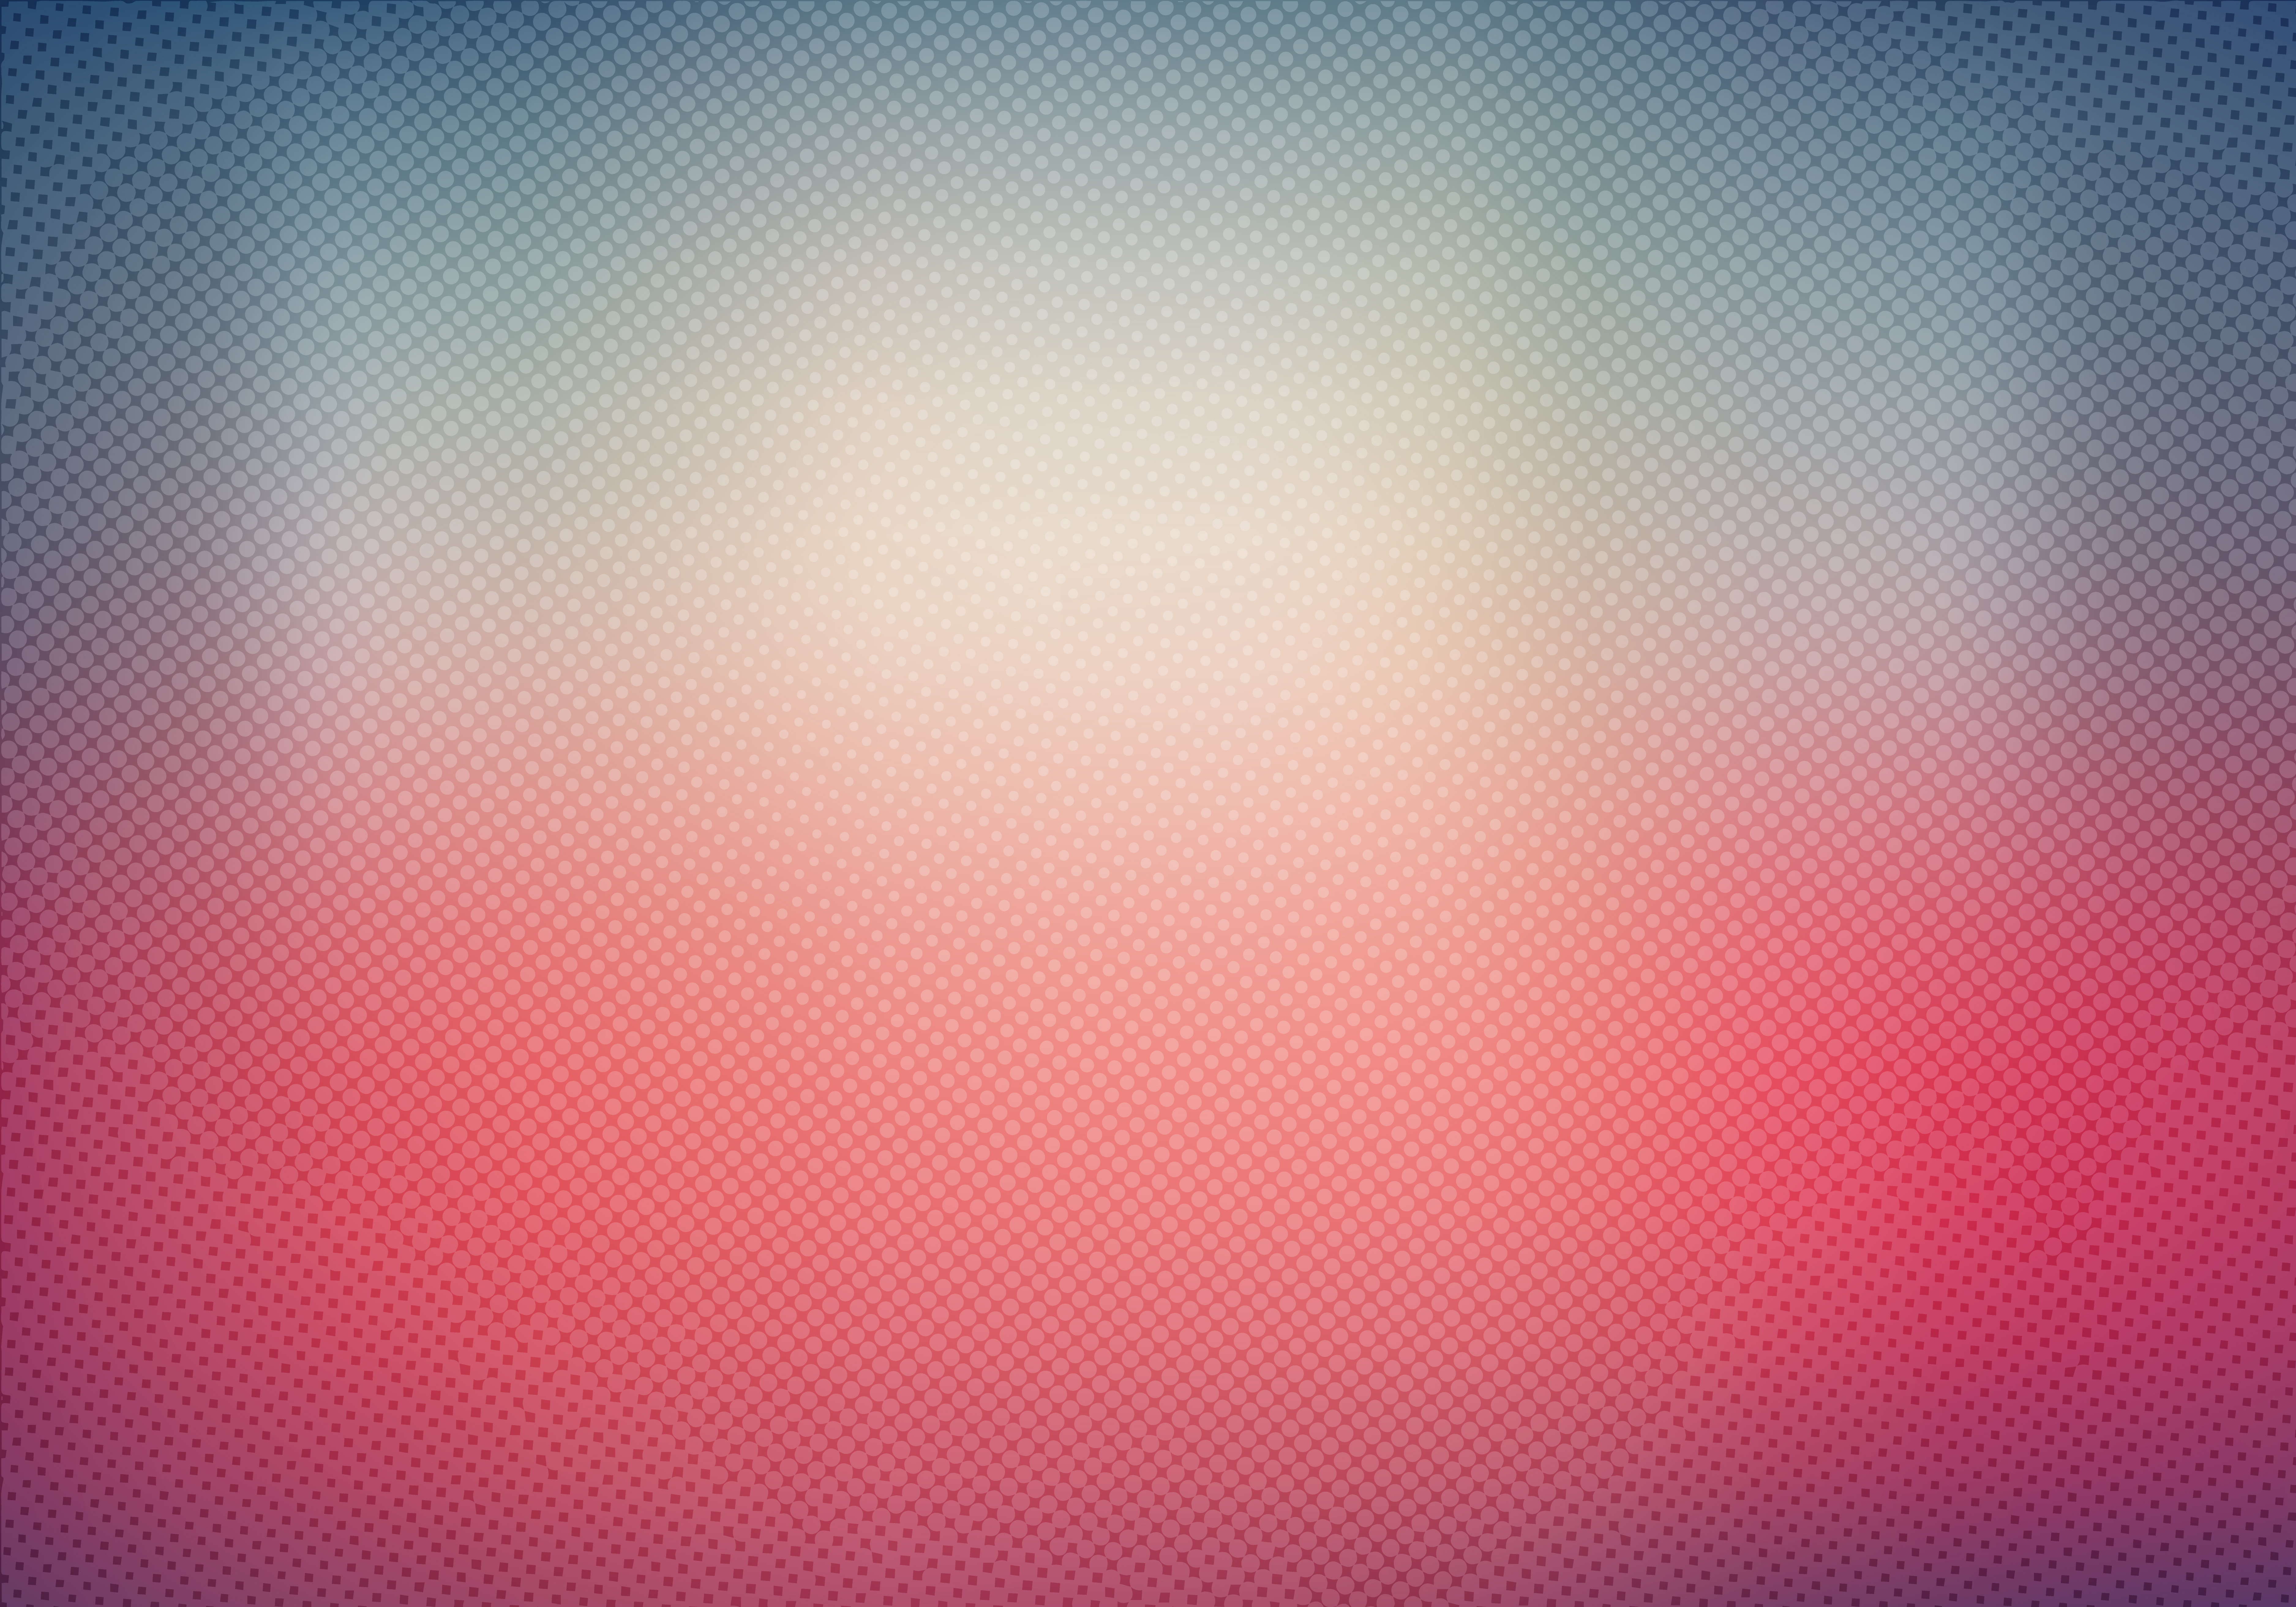 Abstract blurred background vibrant color with halftone gradient effect